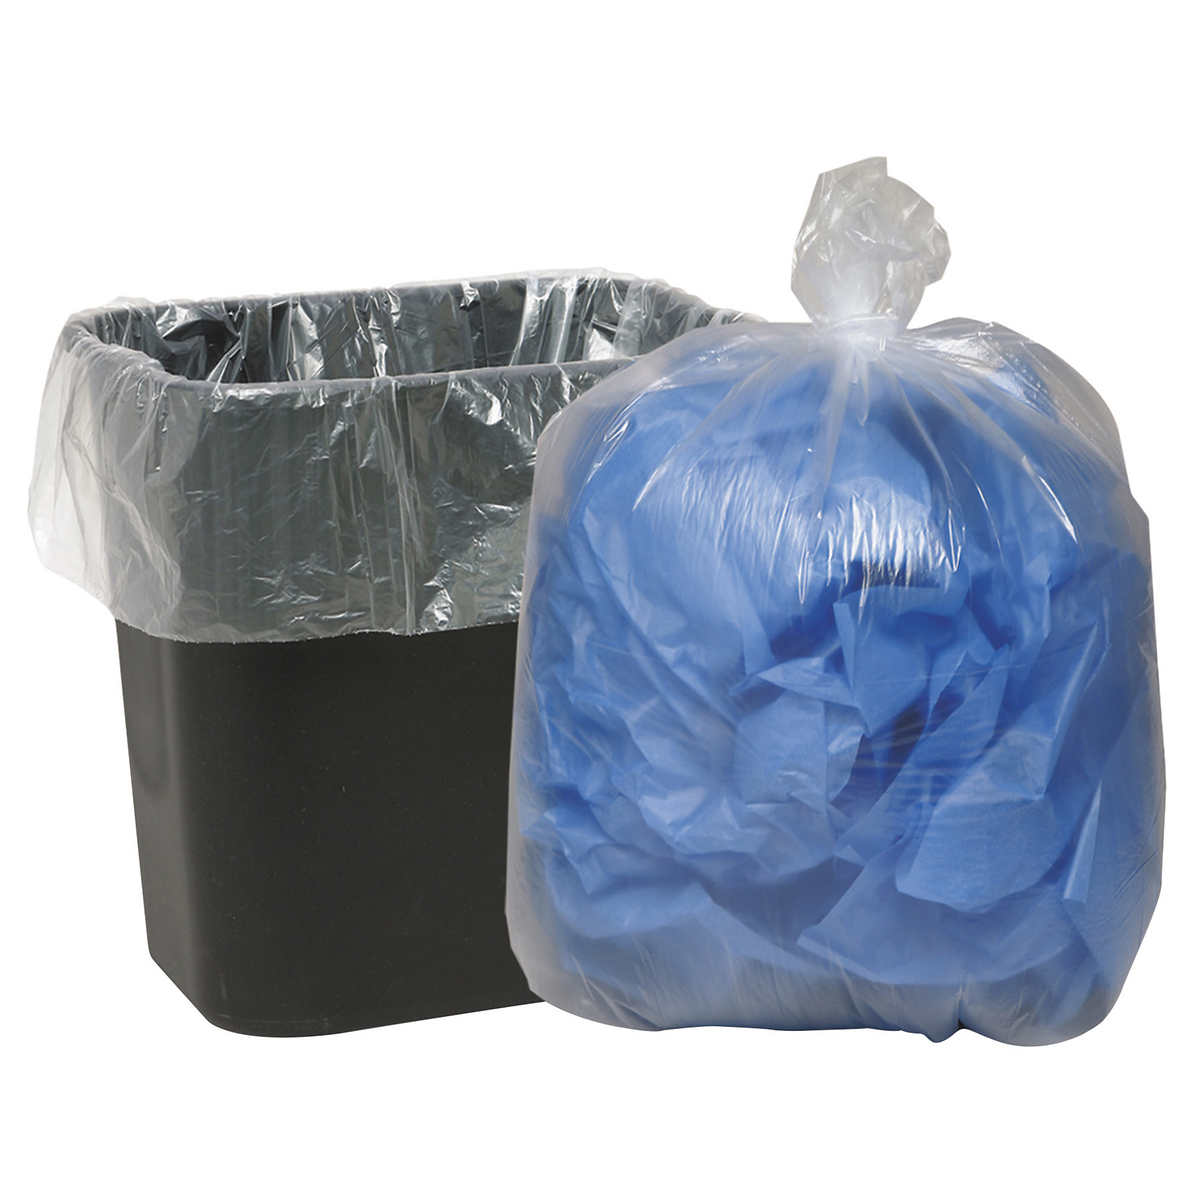 Plasticplace 7-10 Gallon Trash Bags, Clear, (500 Count)